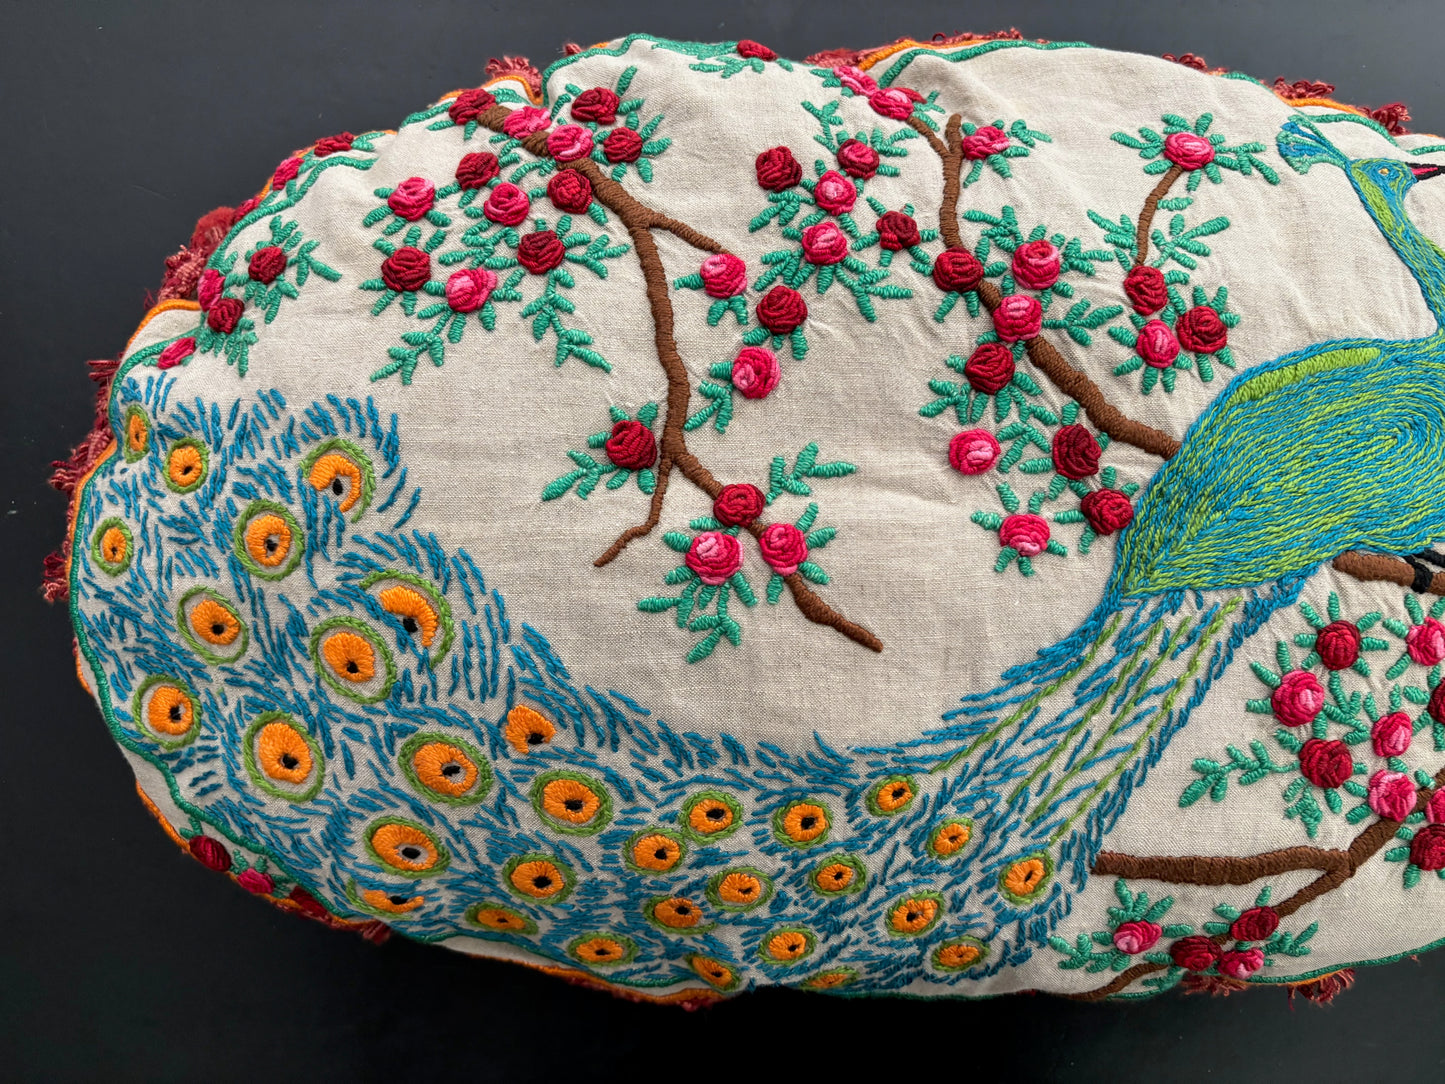 Antique Hand Embroidered Boudoir Peacock Pillow